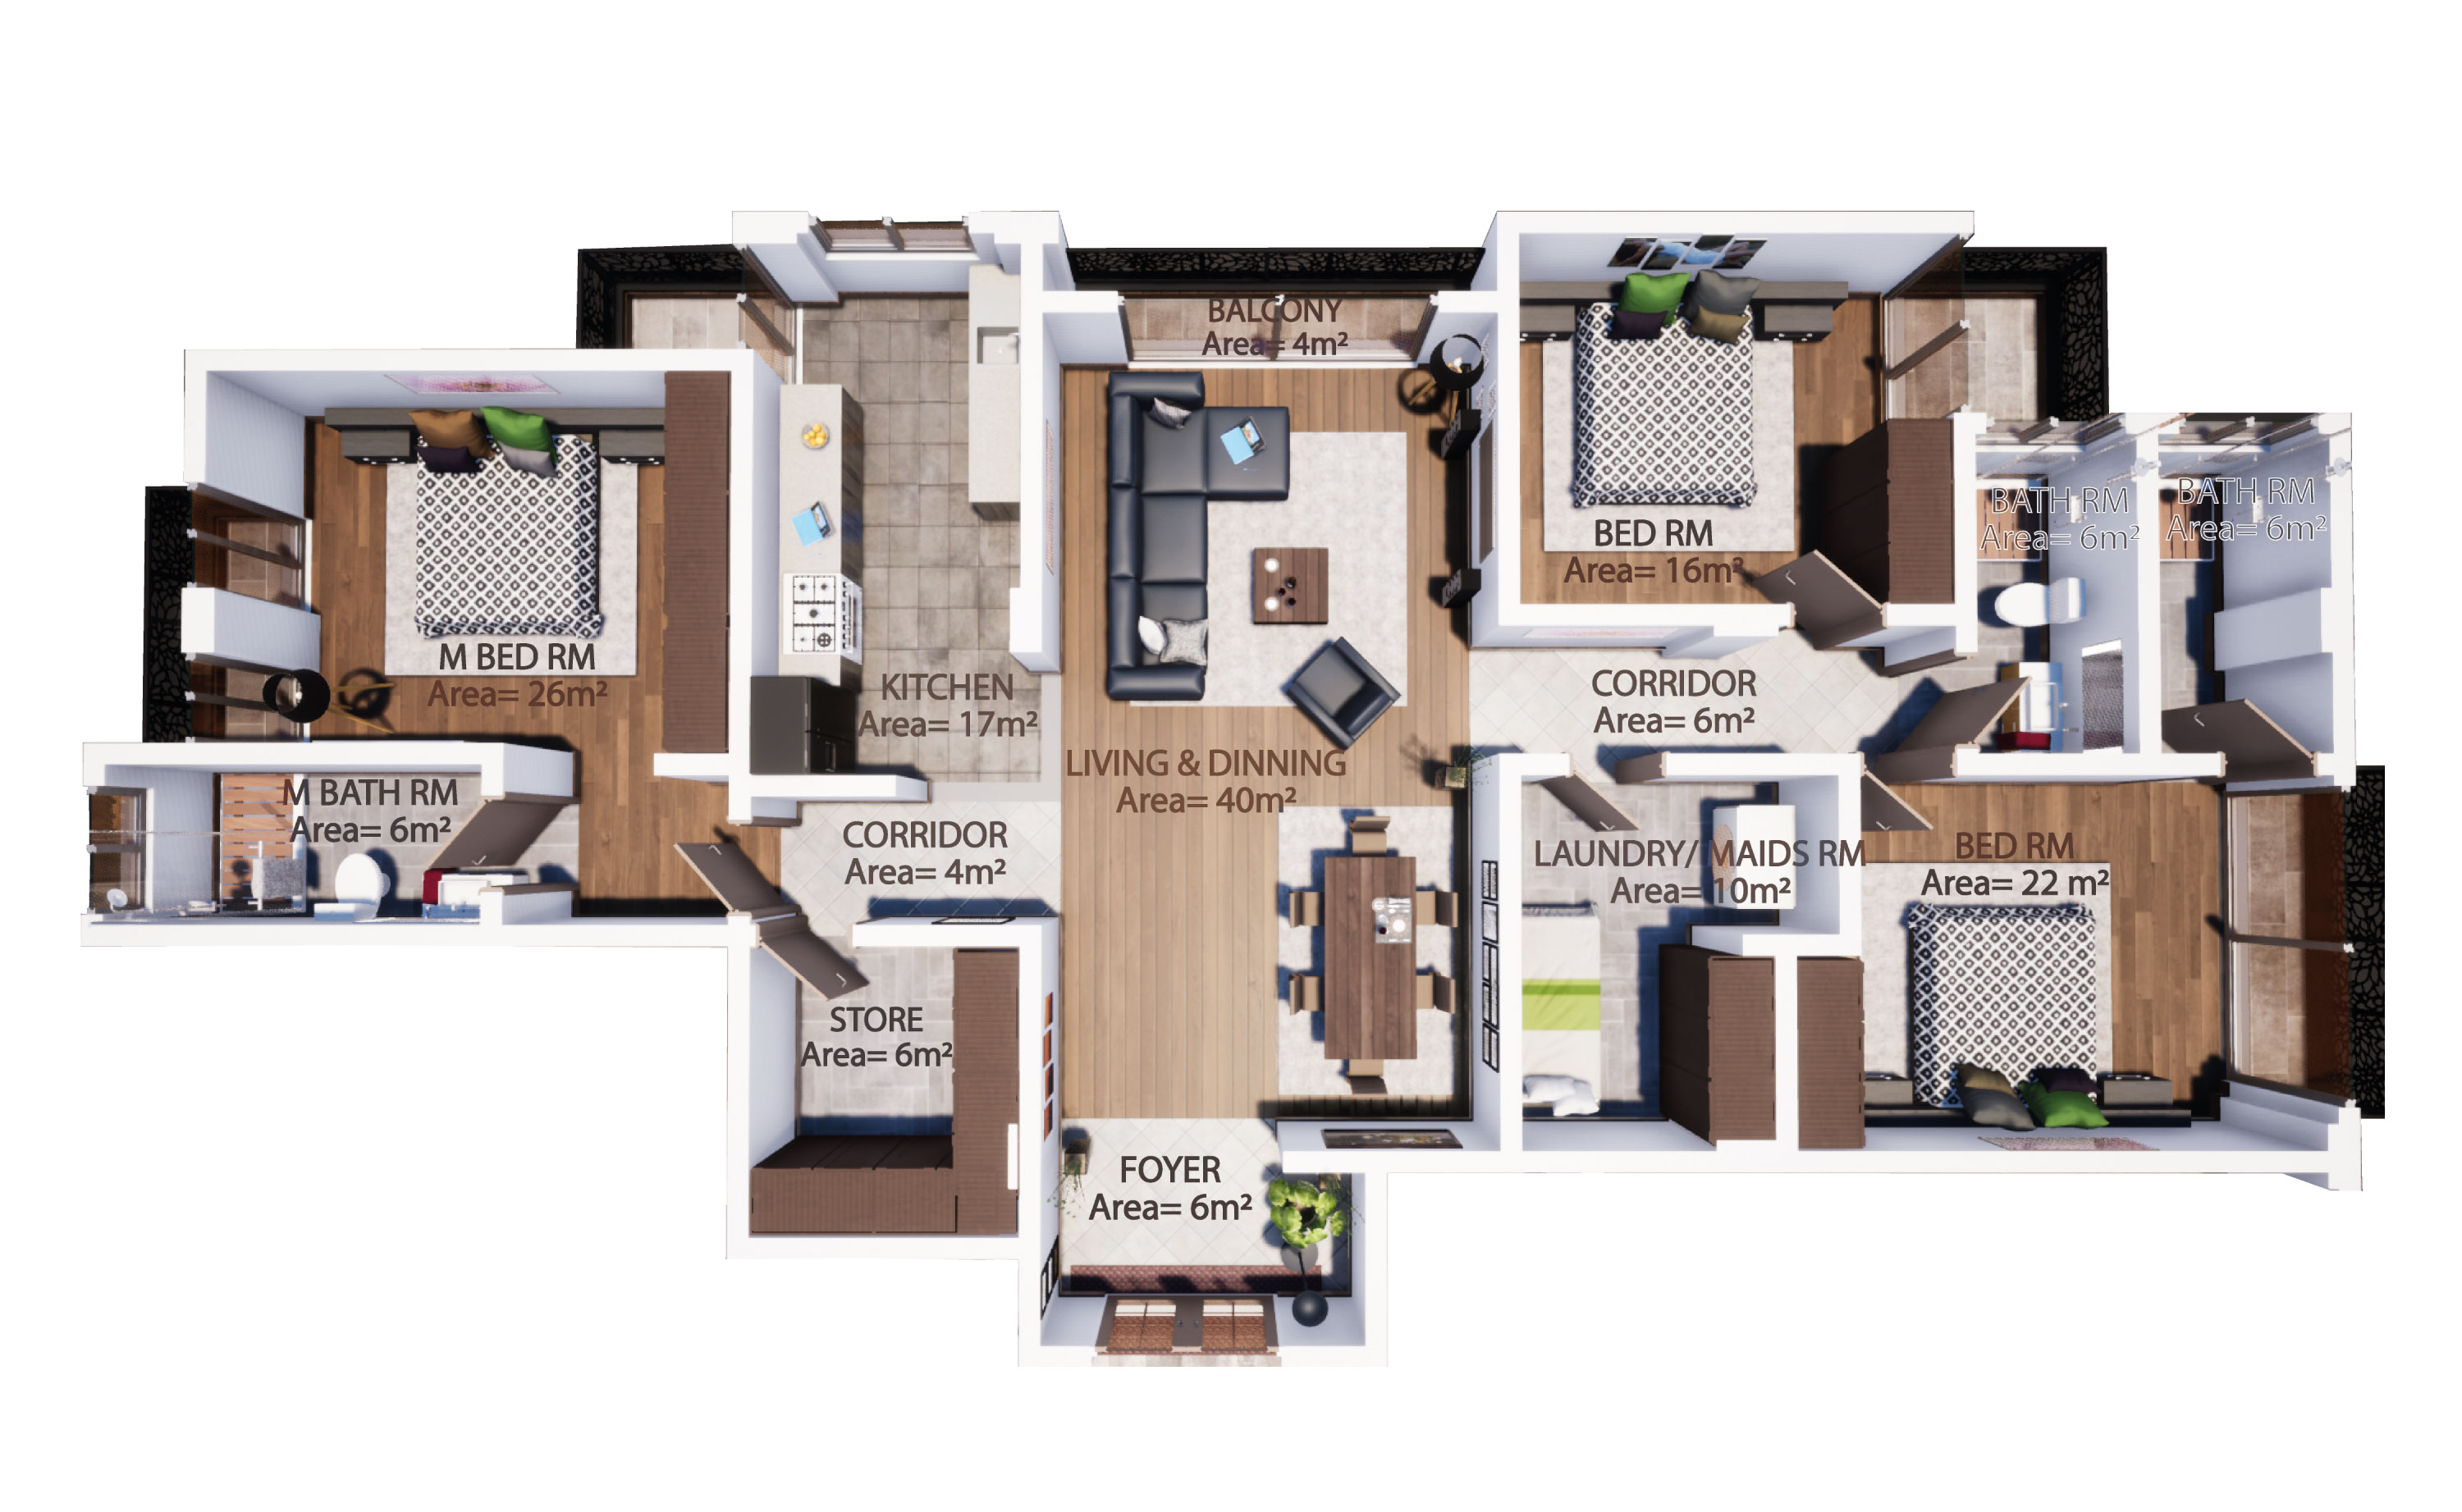 TYPE A: 3 BED ROOM APARTMENT